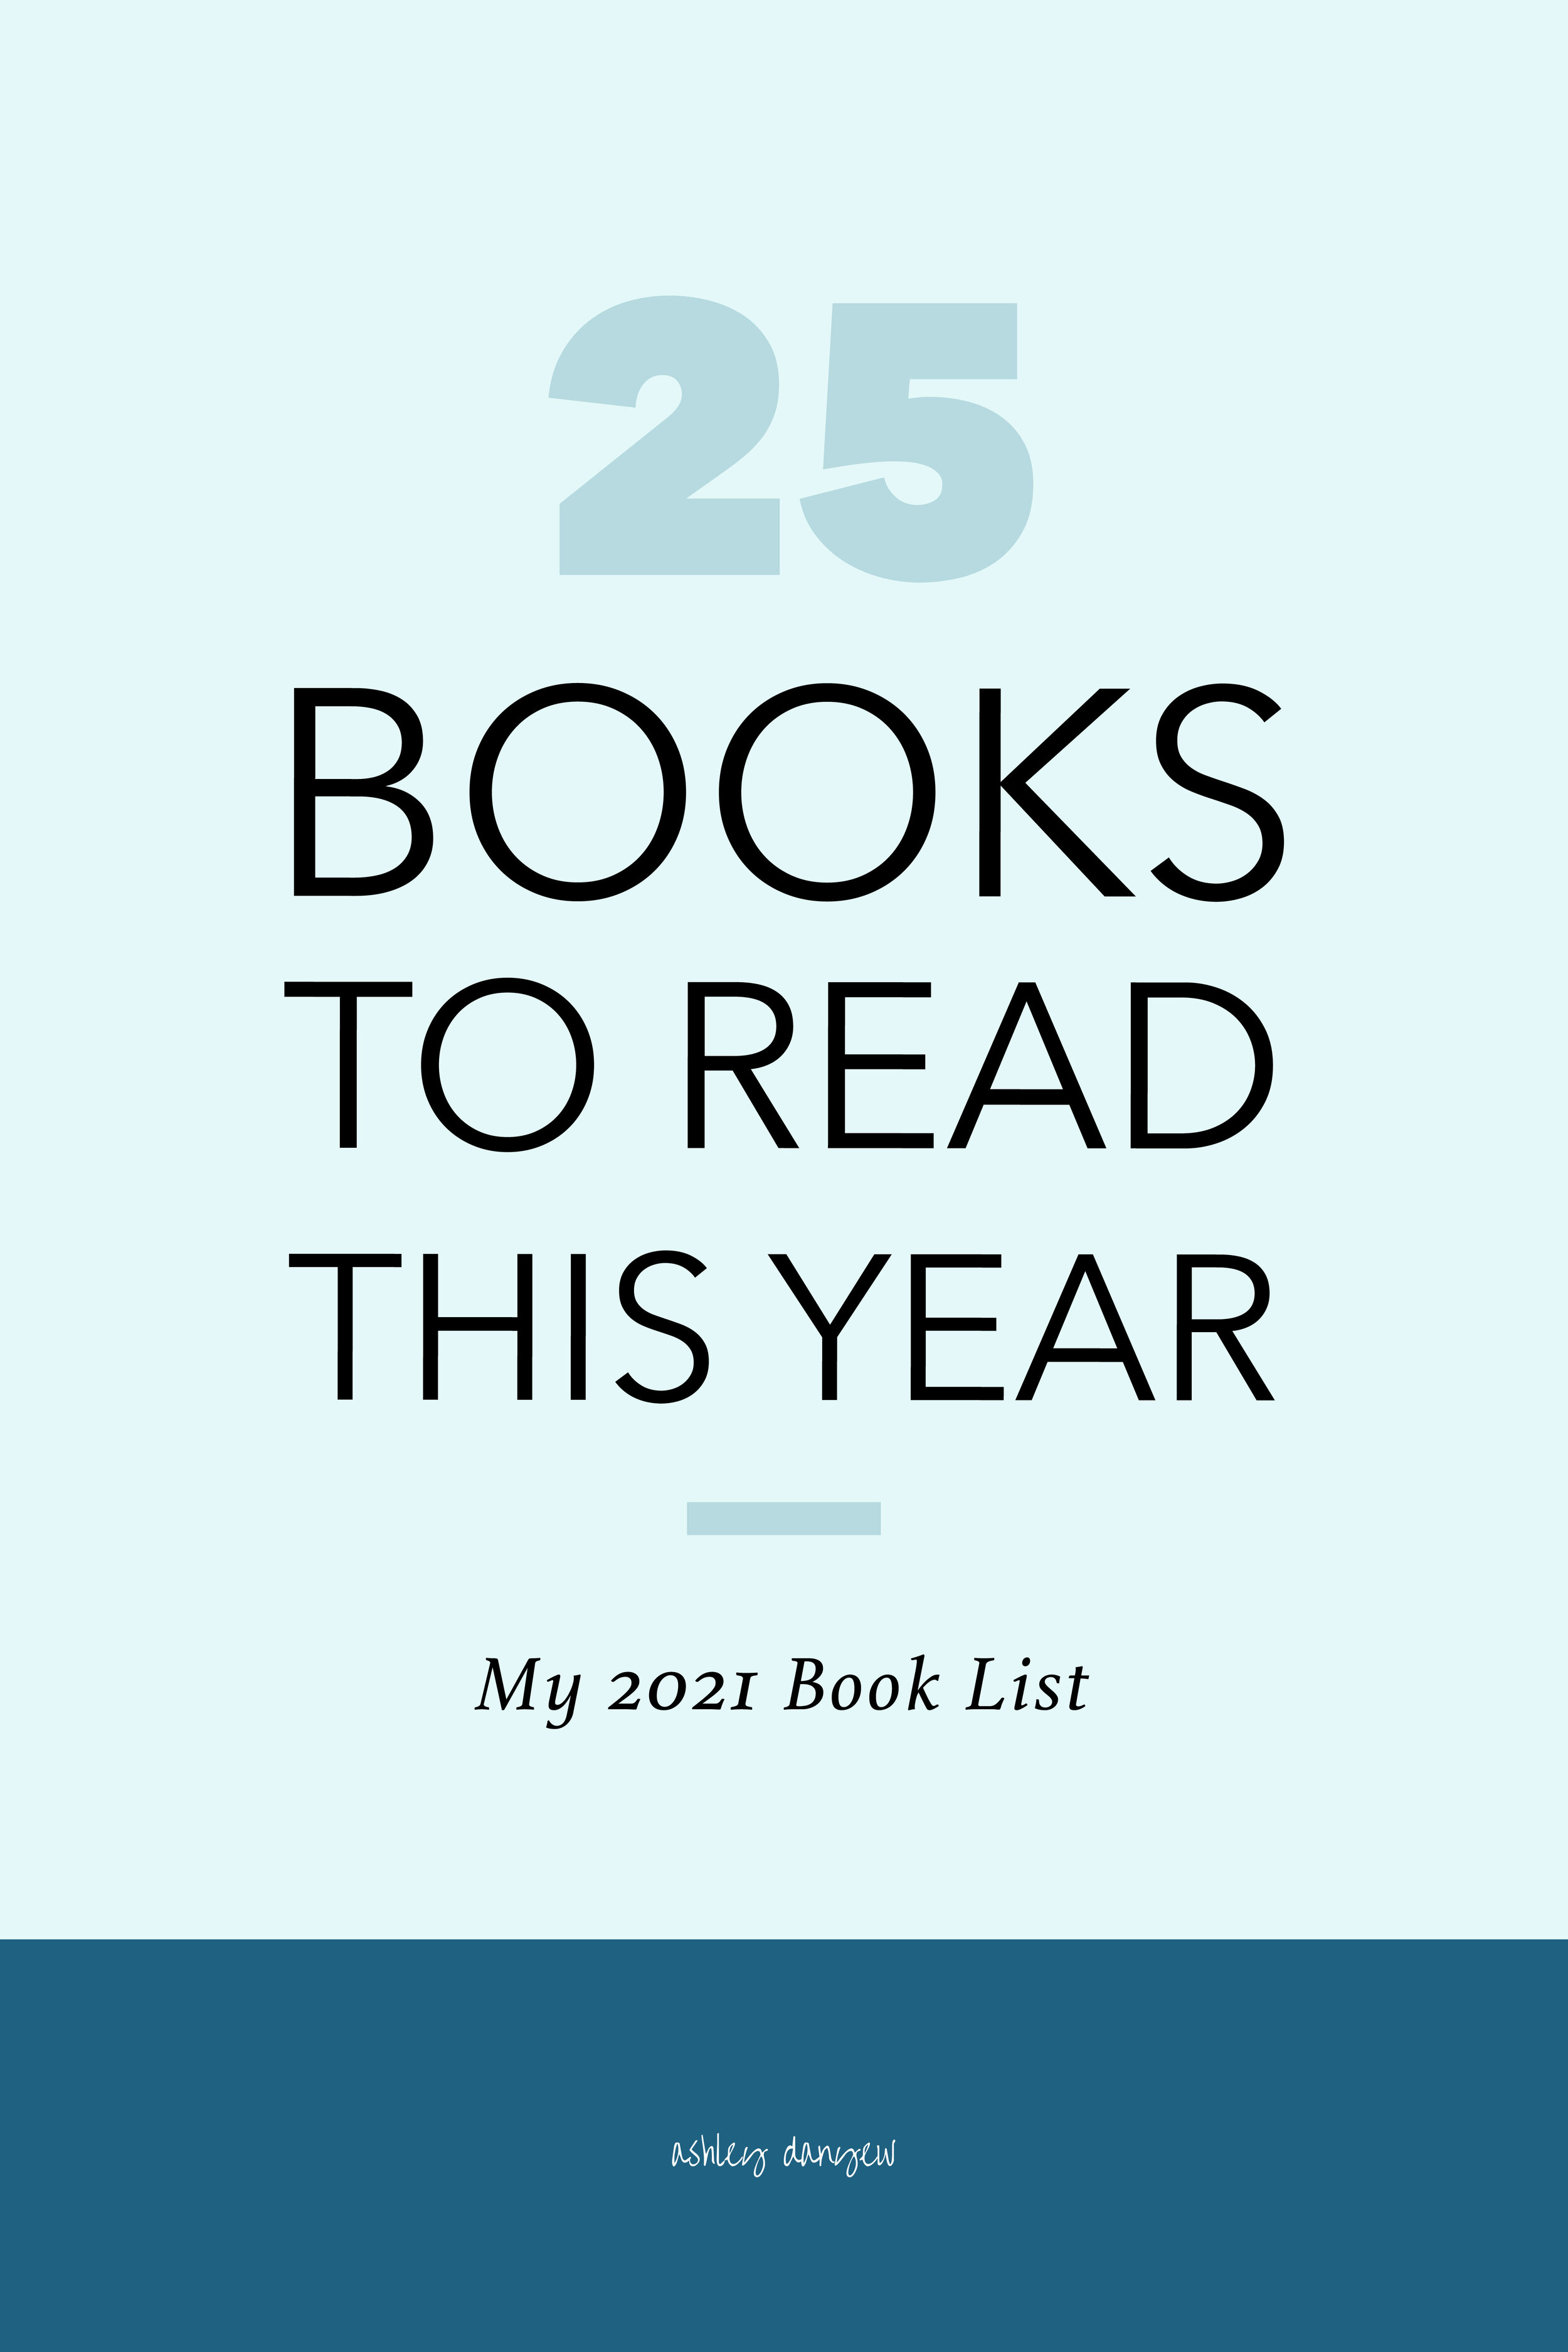 25 Books to Read This Year (2021 Book List)